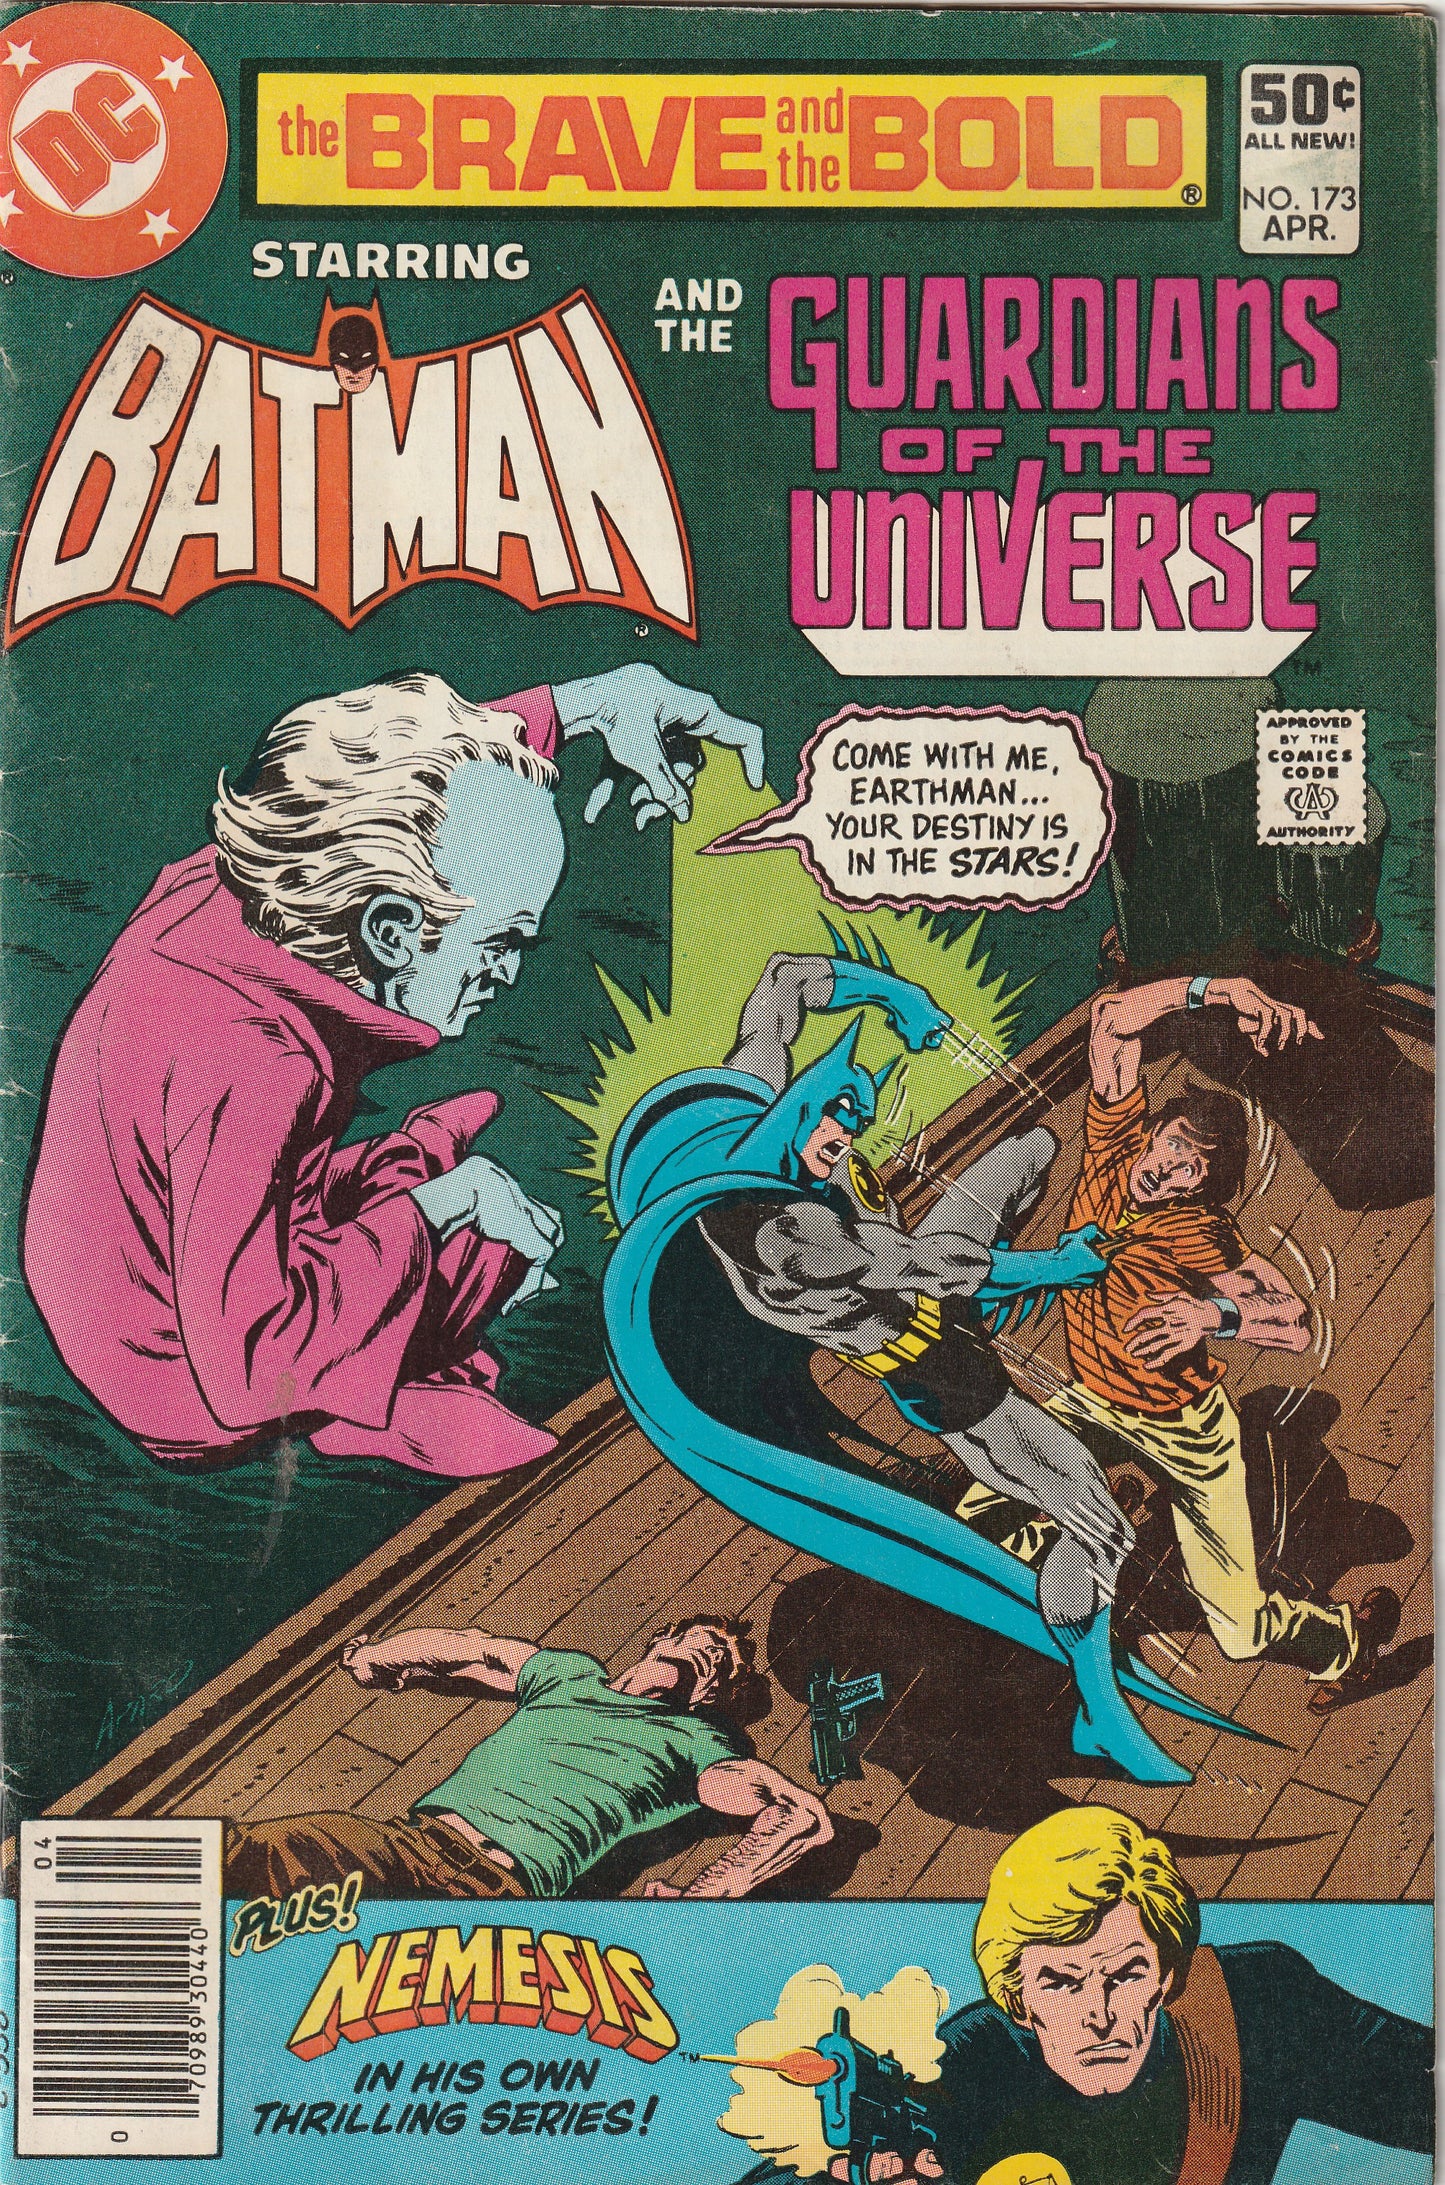 Brave and the Bold #173 (1981) - Batman & Guardians of the Universe